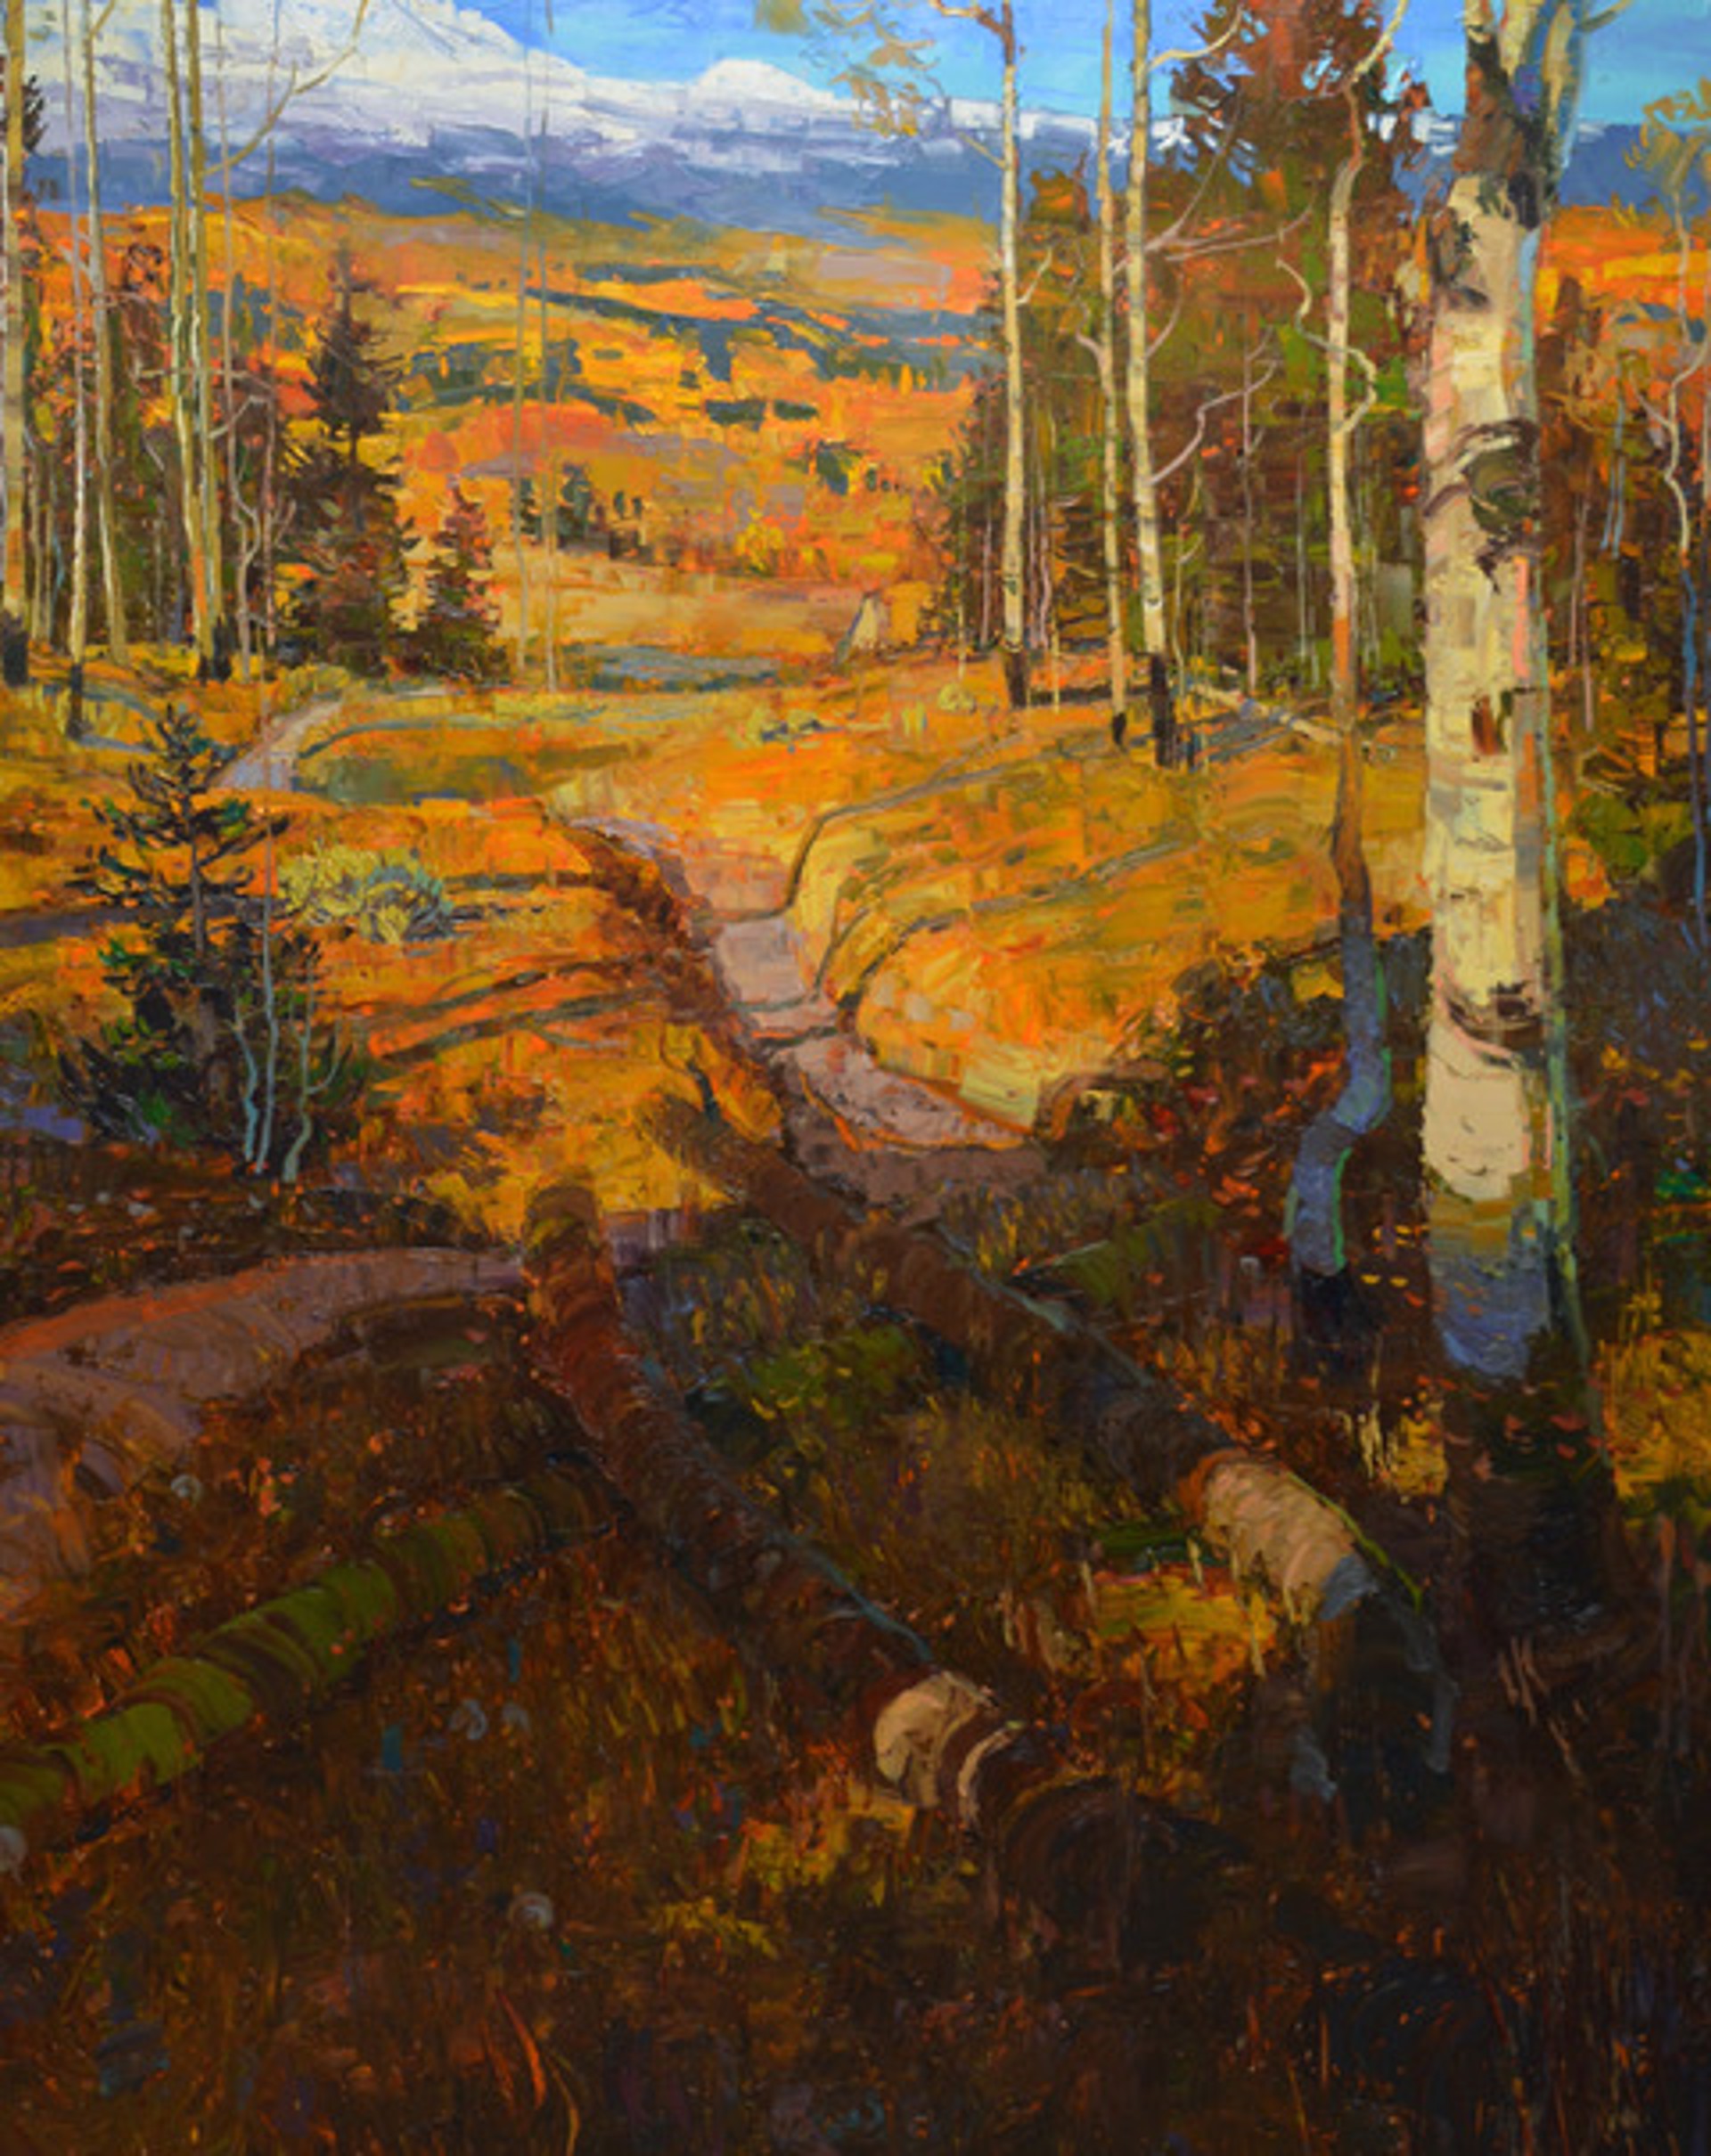 An Oil Painting On Canvas Of A Path Through Aspen Trees In The Fall Or Autumn By Silas Thompson Available At Gallery Wild